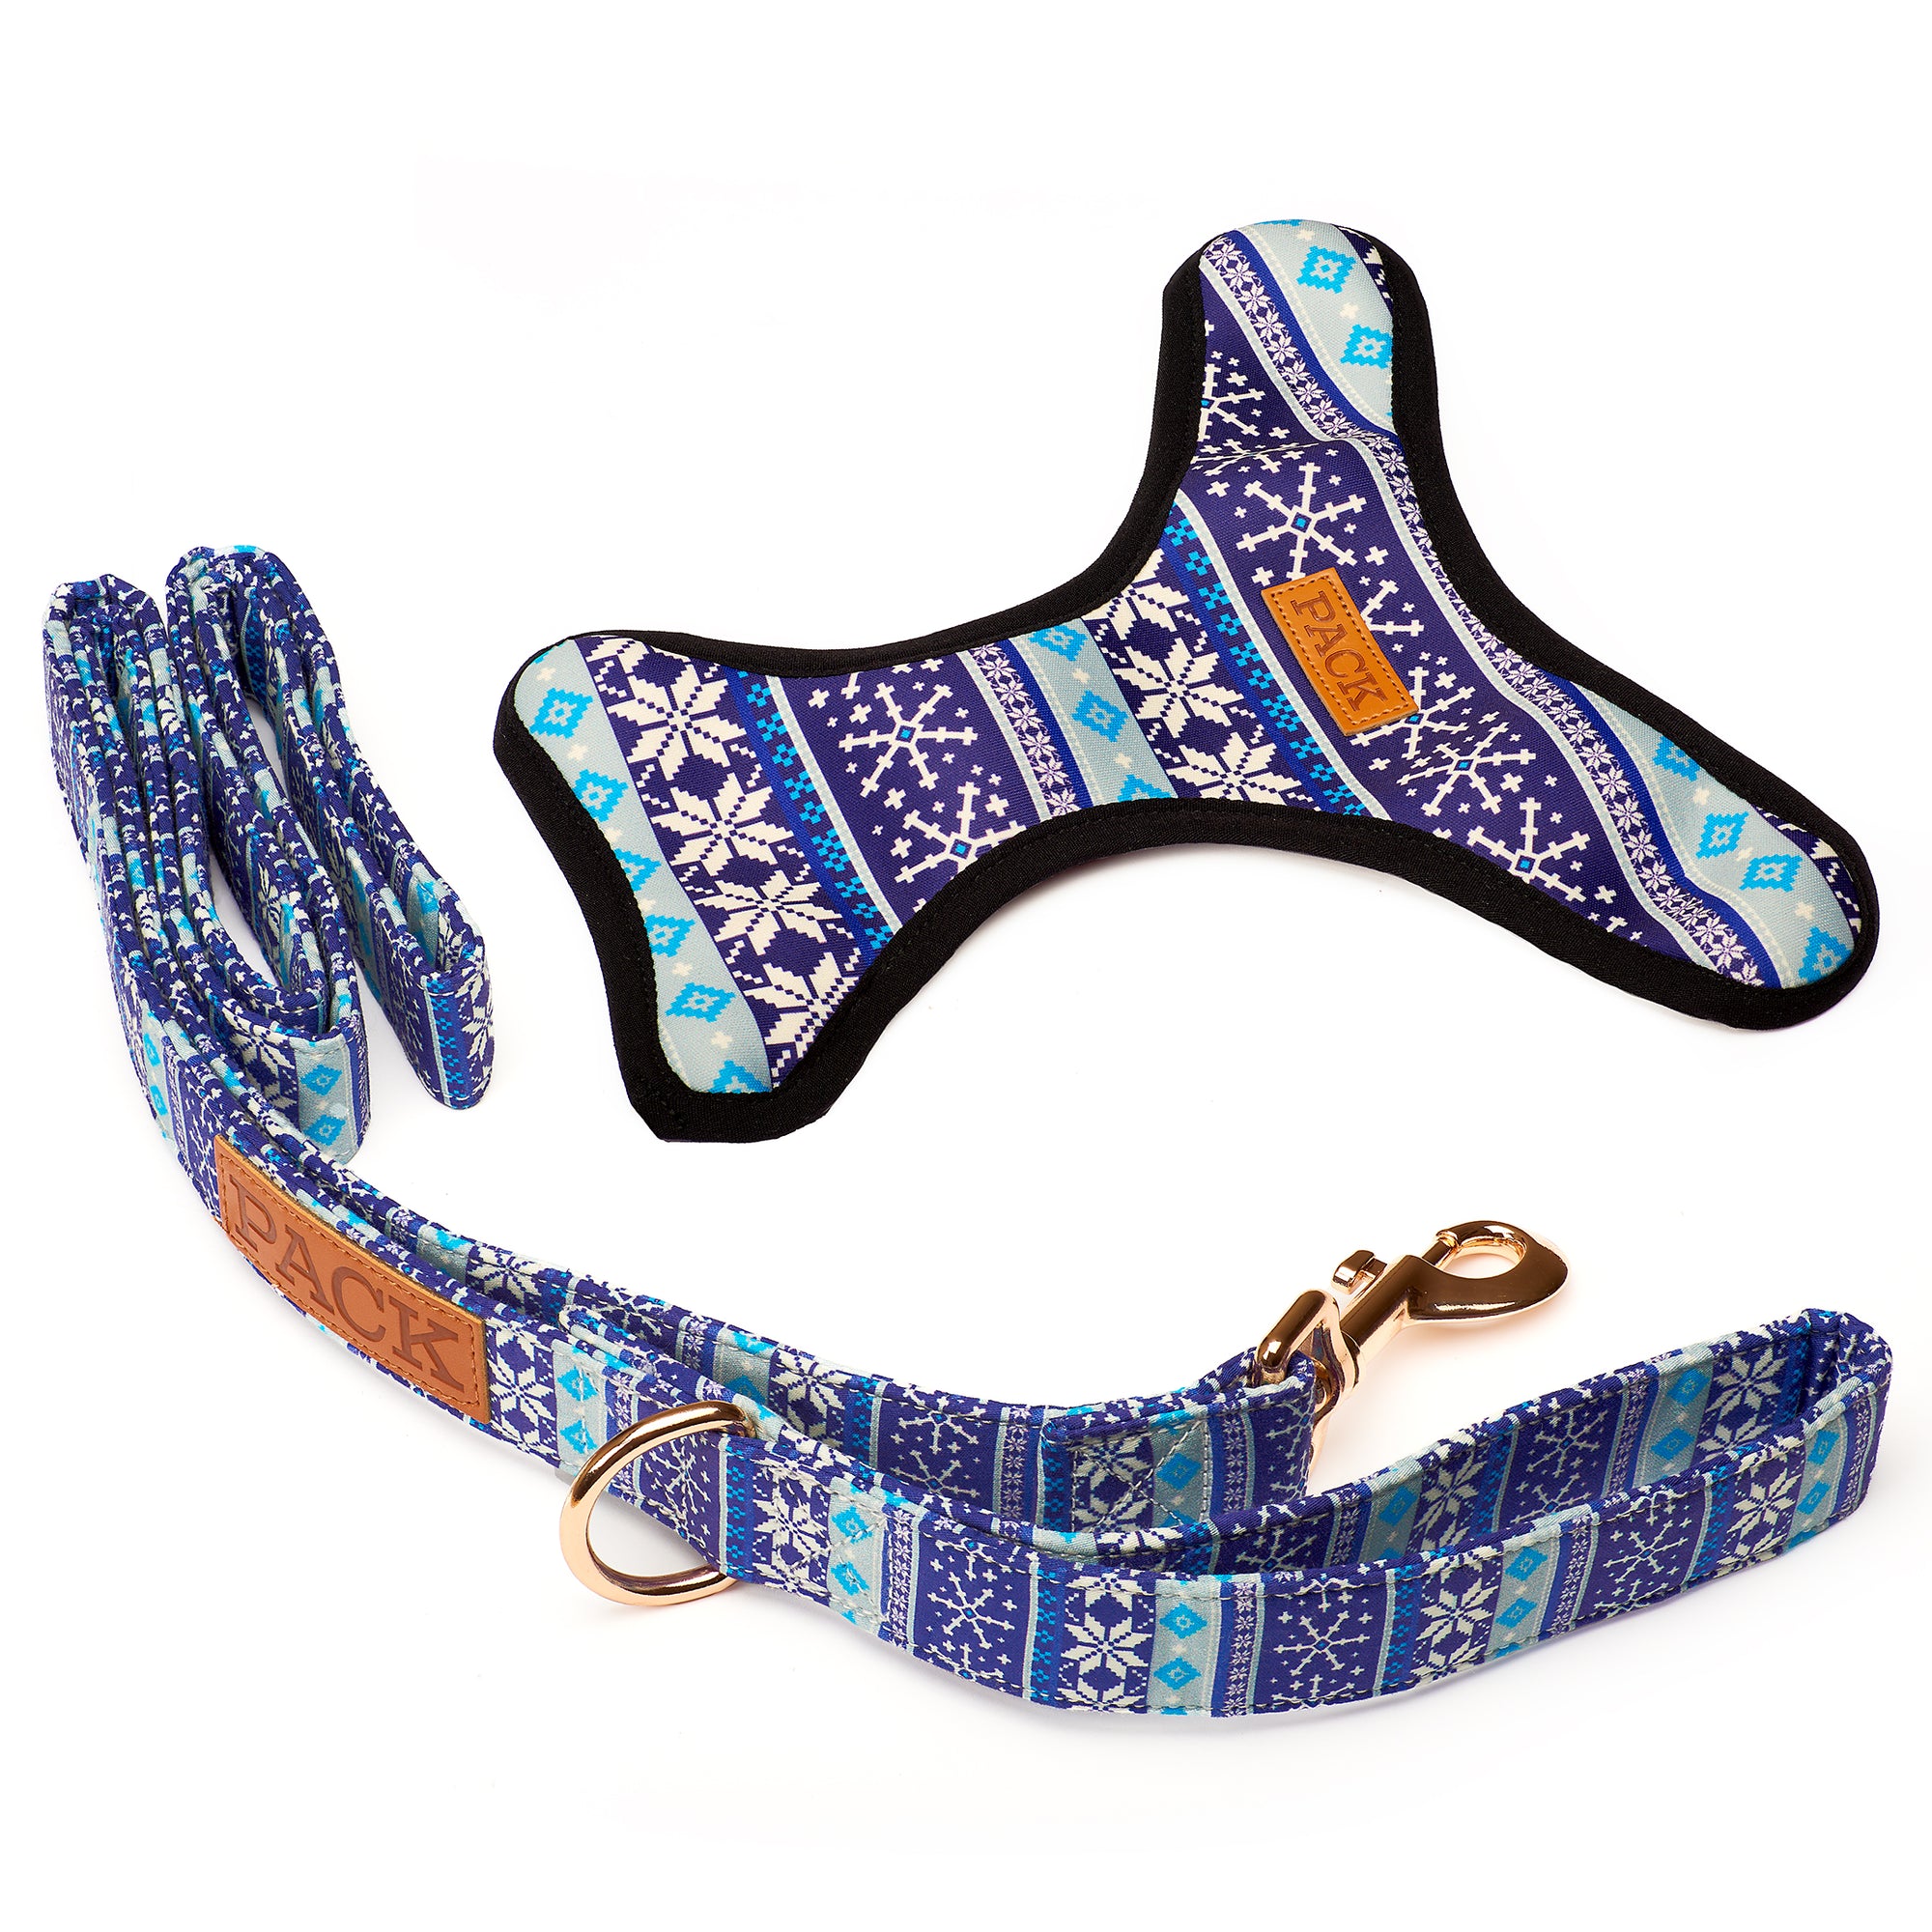 The Sweater Leash + Reversible Harness